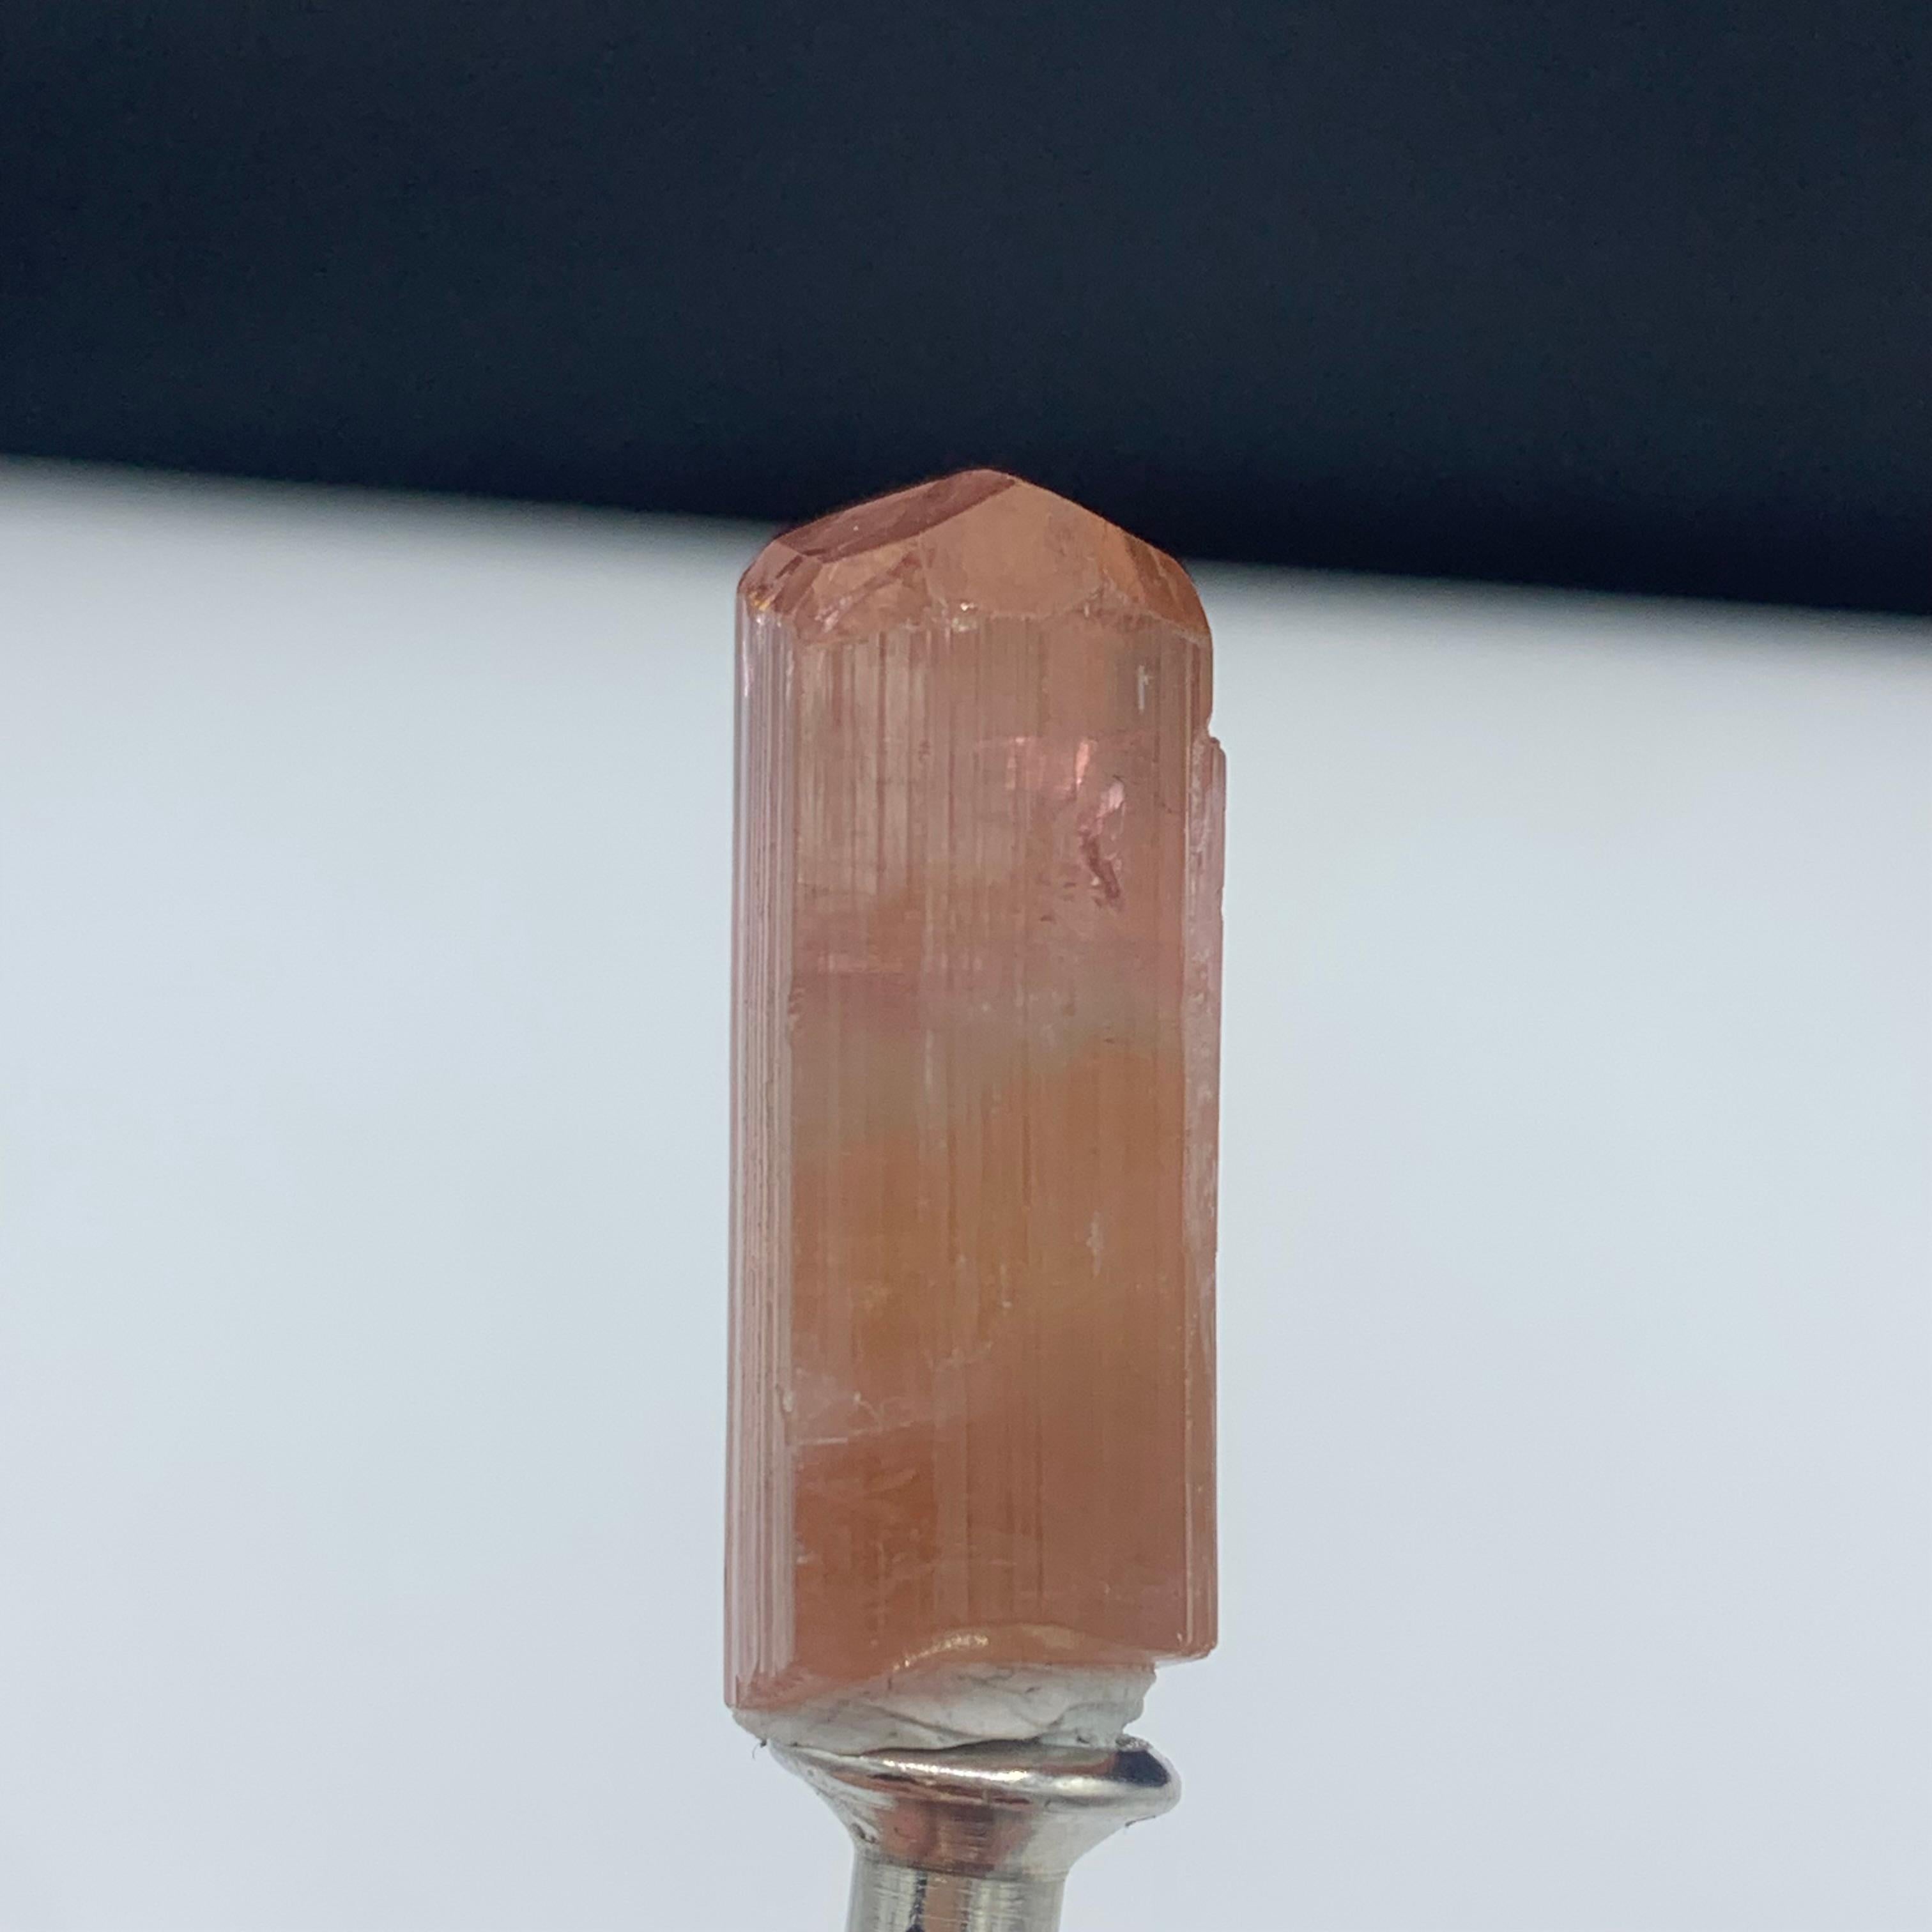 50.00 Carat Amazing Peach Color Terminated Tourmaline Crystal From Afghanistan For Sale 1